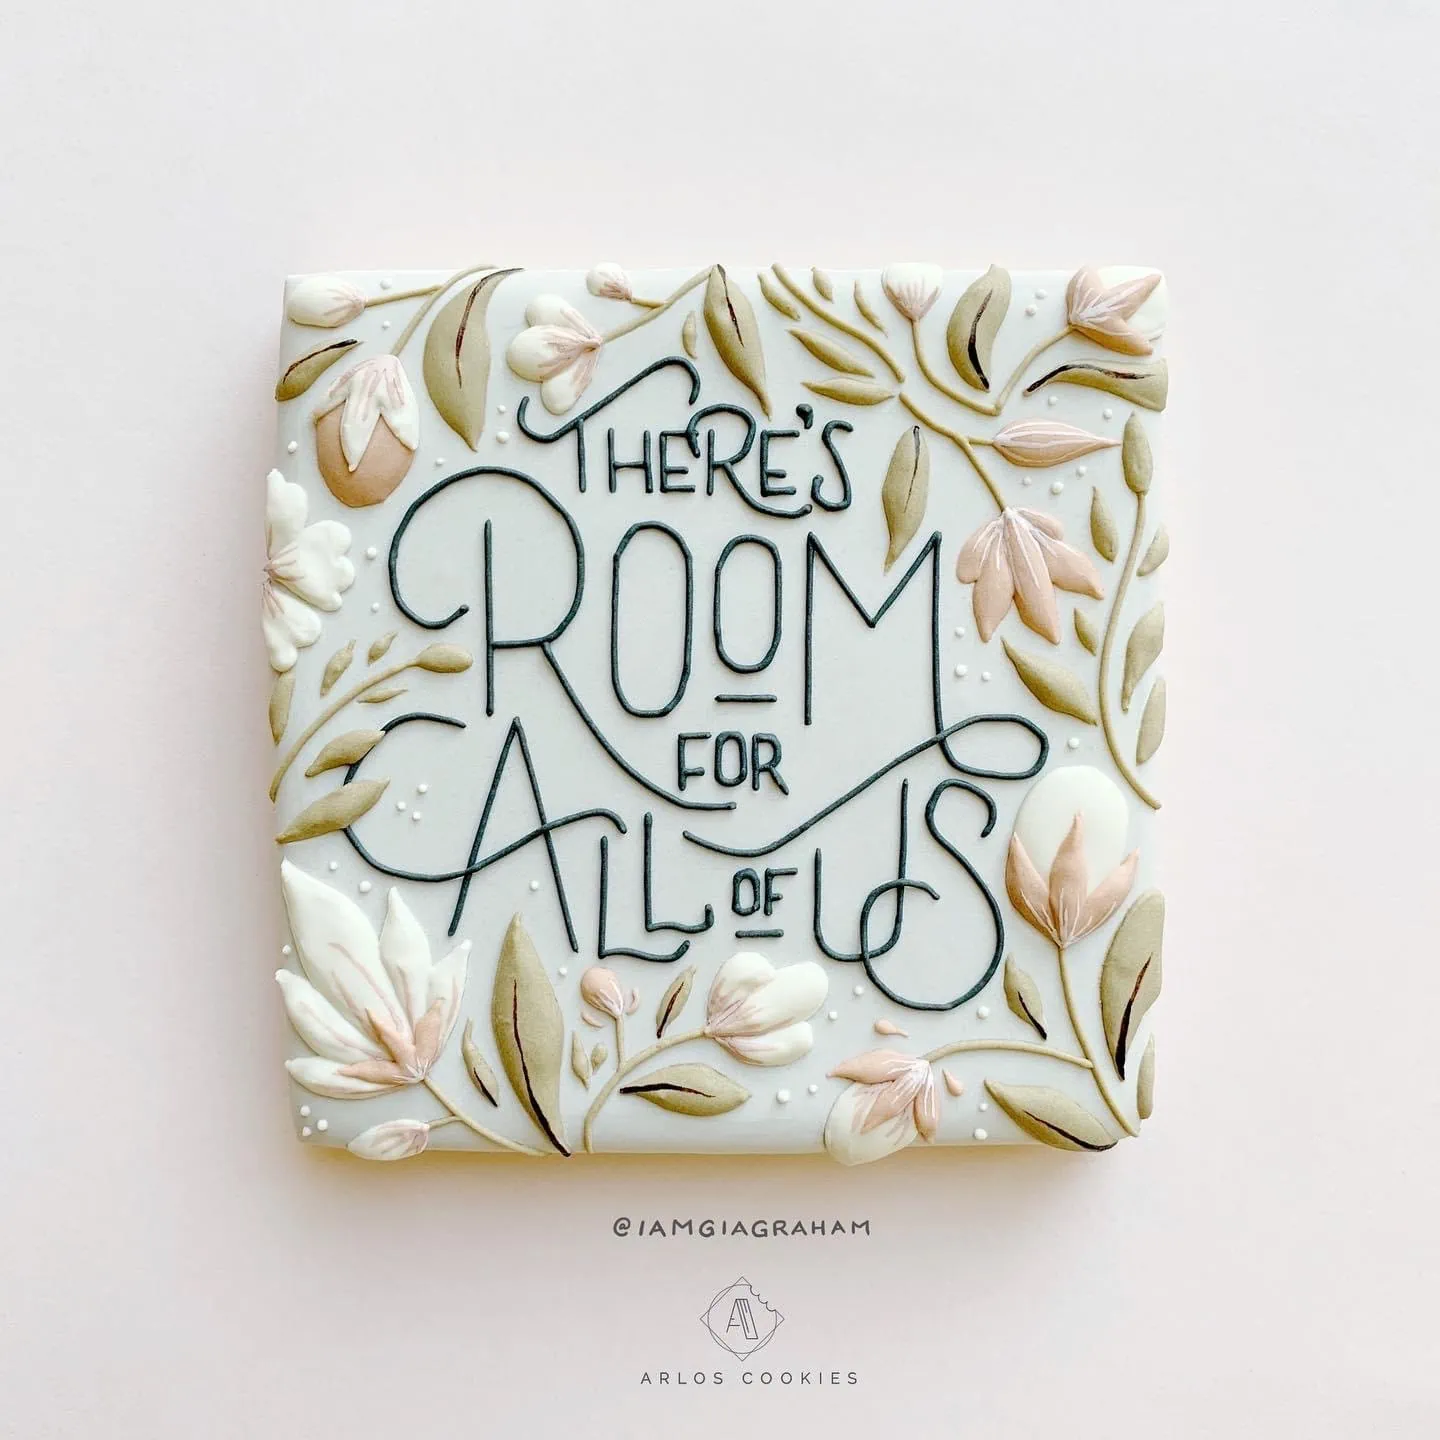 A square cookie decorated with pink and green flowers and decorative text reading "there's room for all of us"